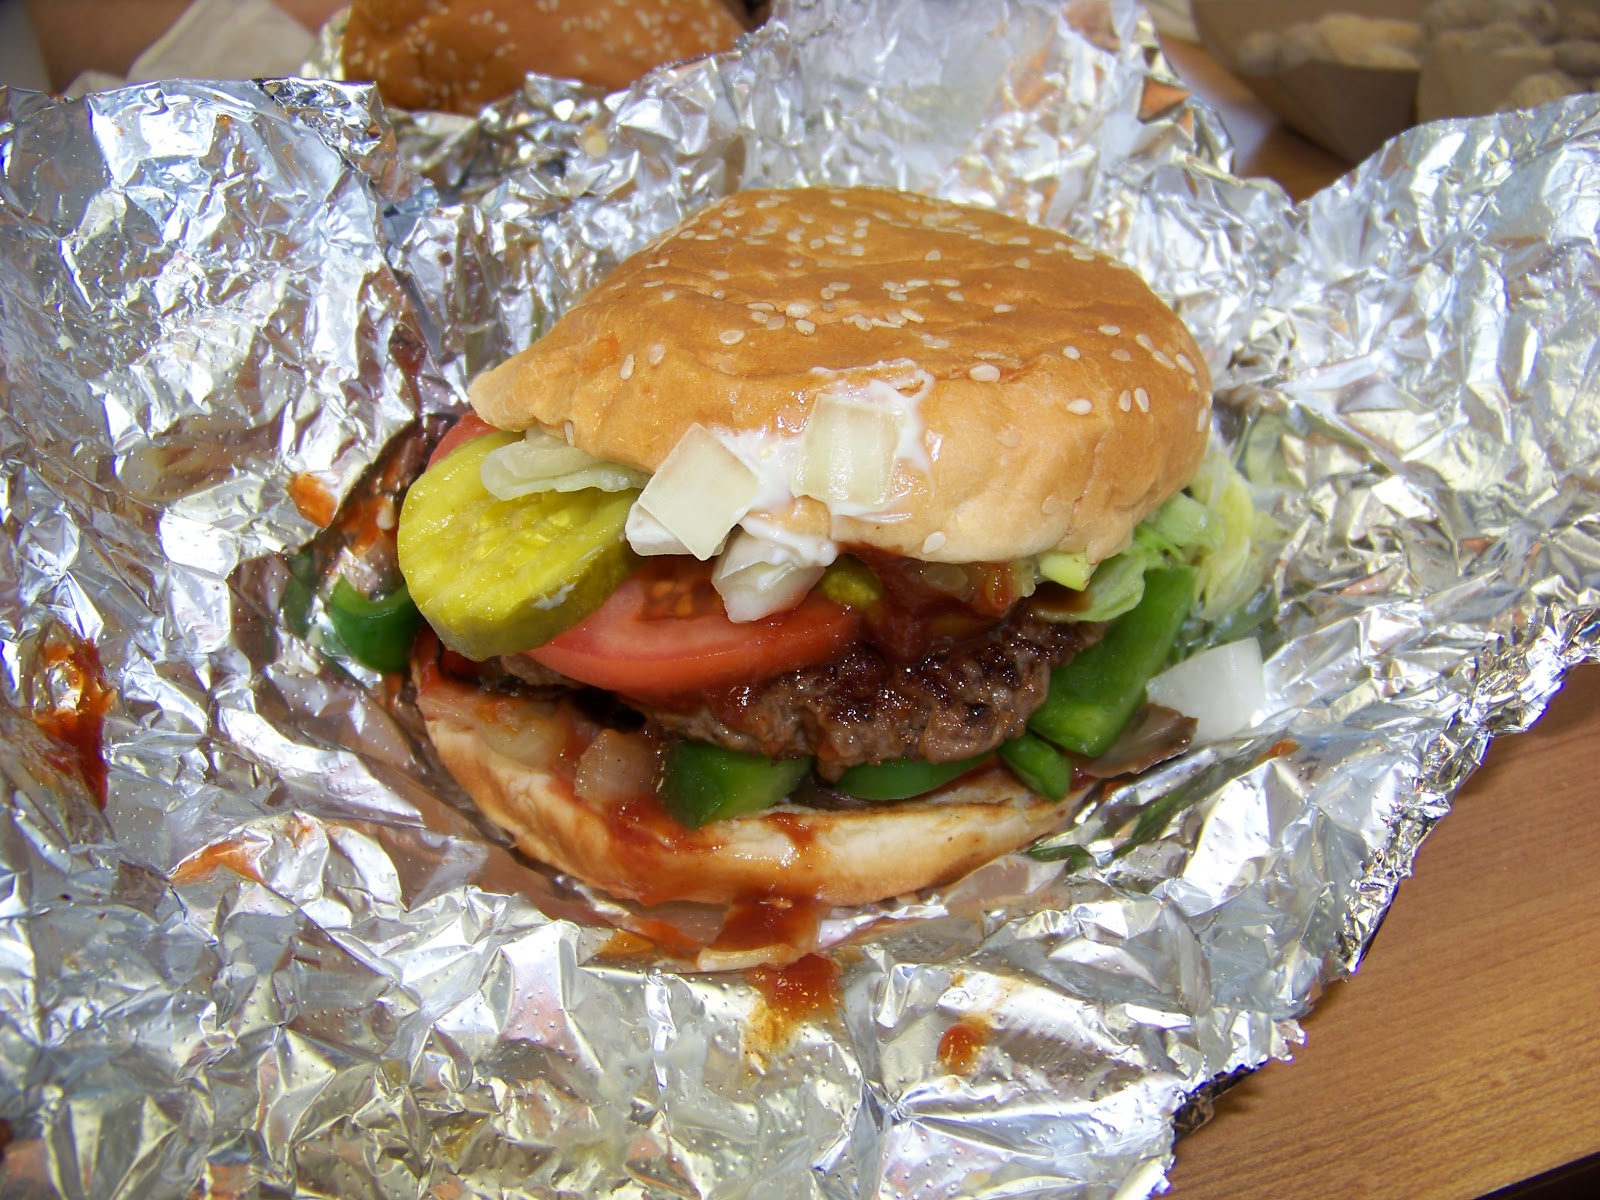 All the toppings make this five guys burger messy - but tasty!